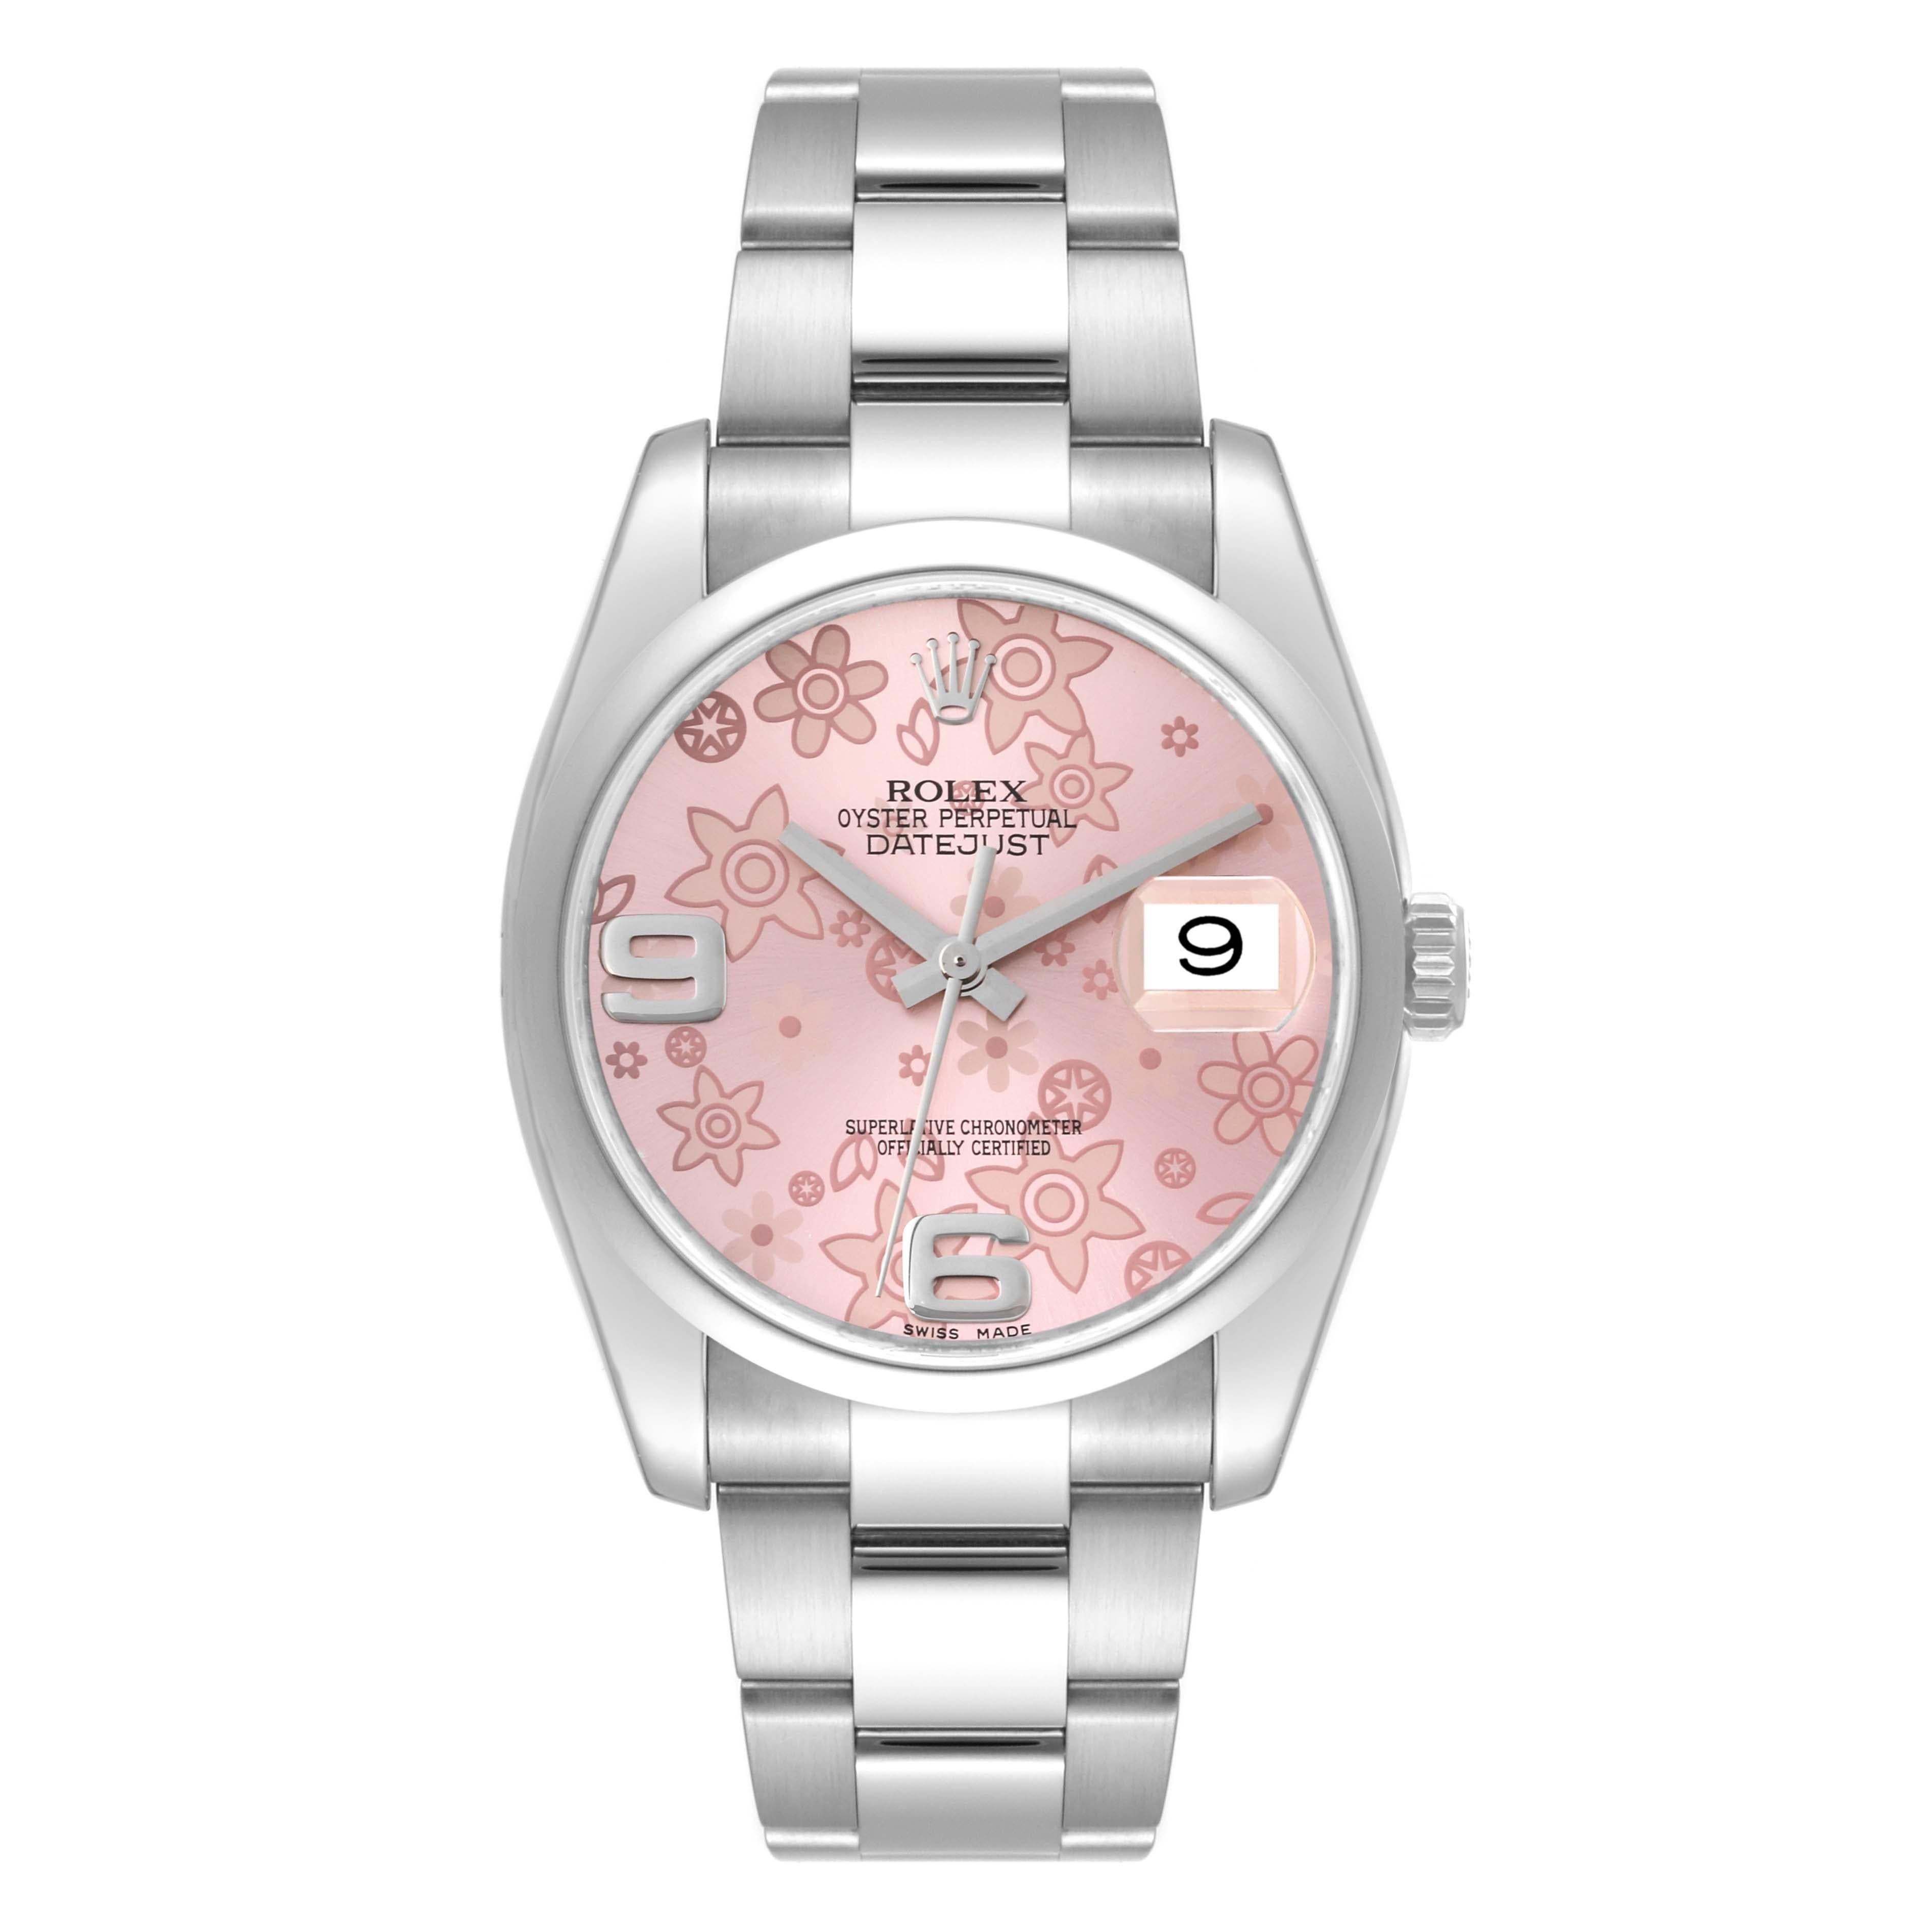 Rolex Datejust 36 Pink Floral Dial Steel Mens Watch 116200 Box Card 7